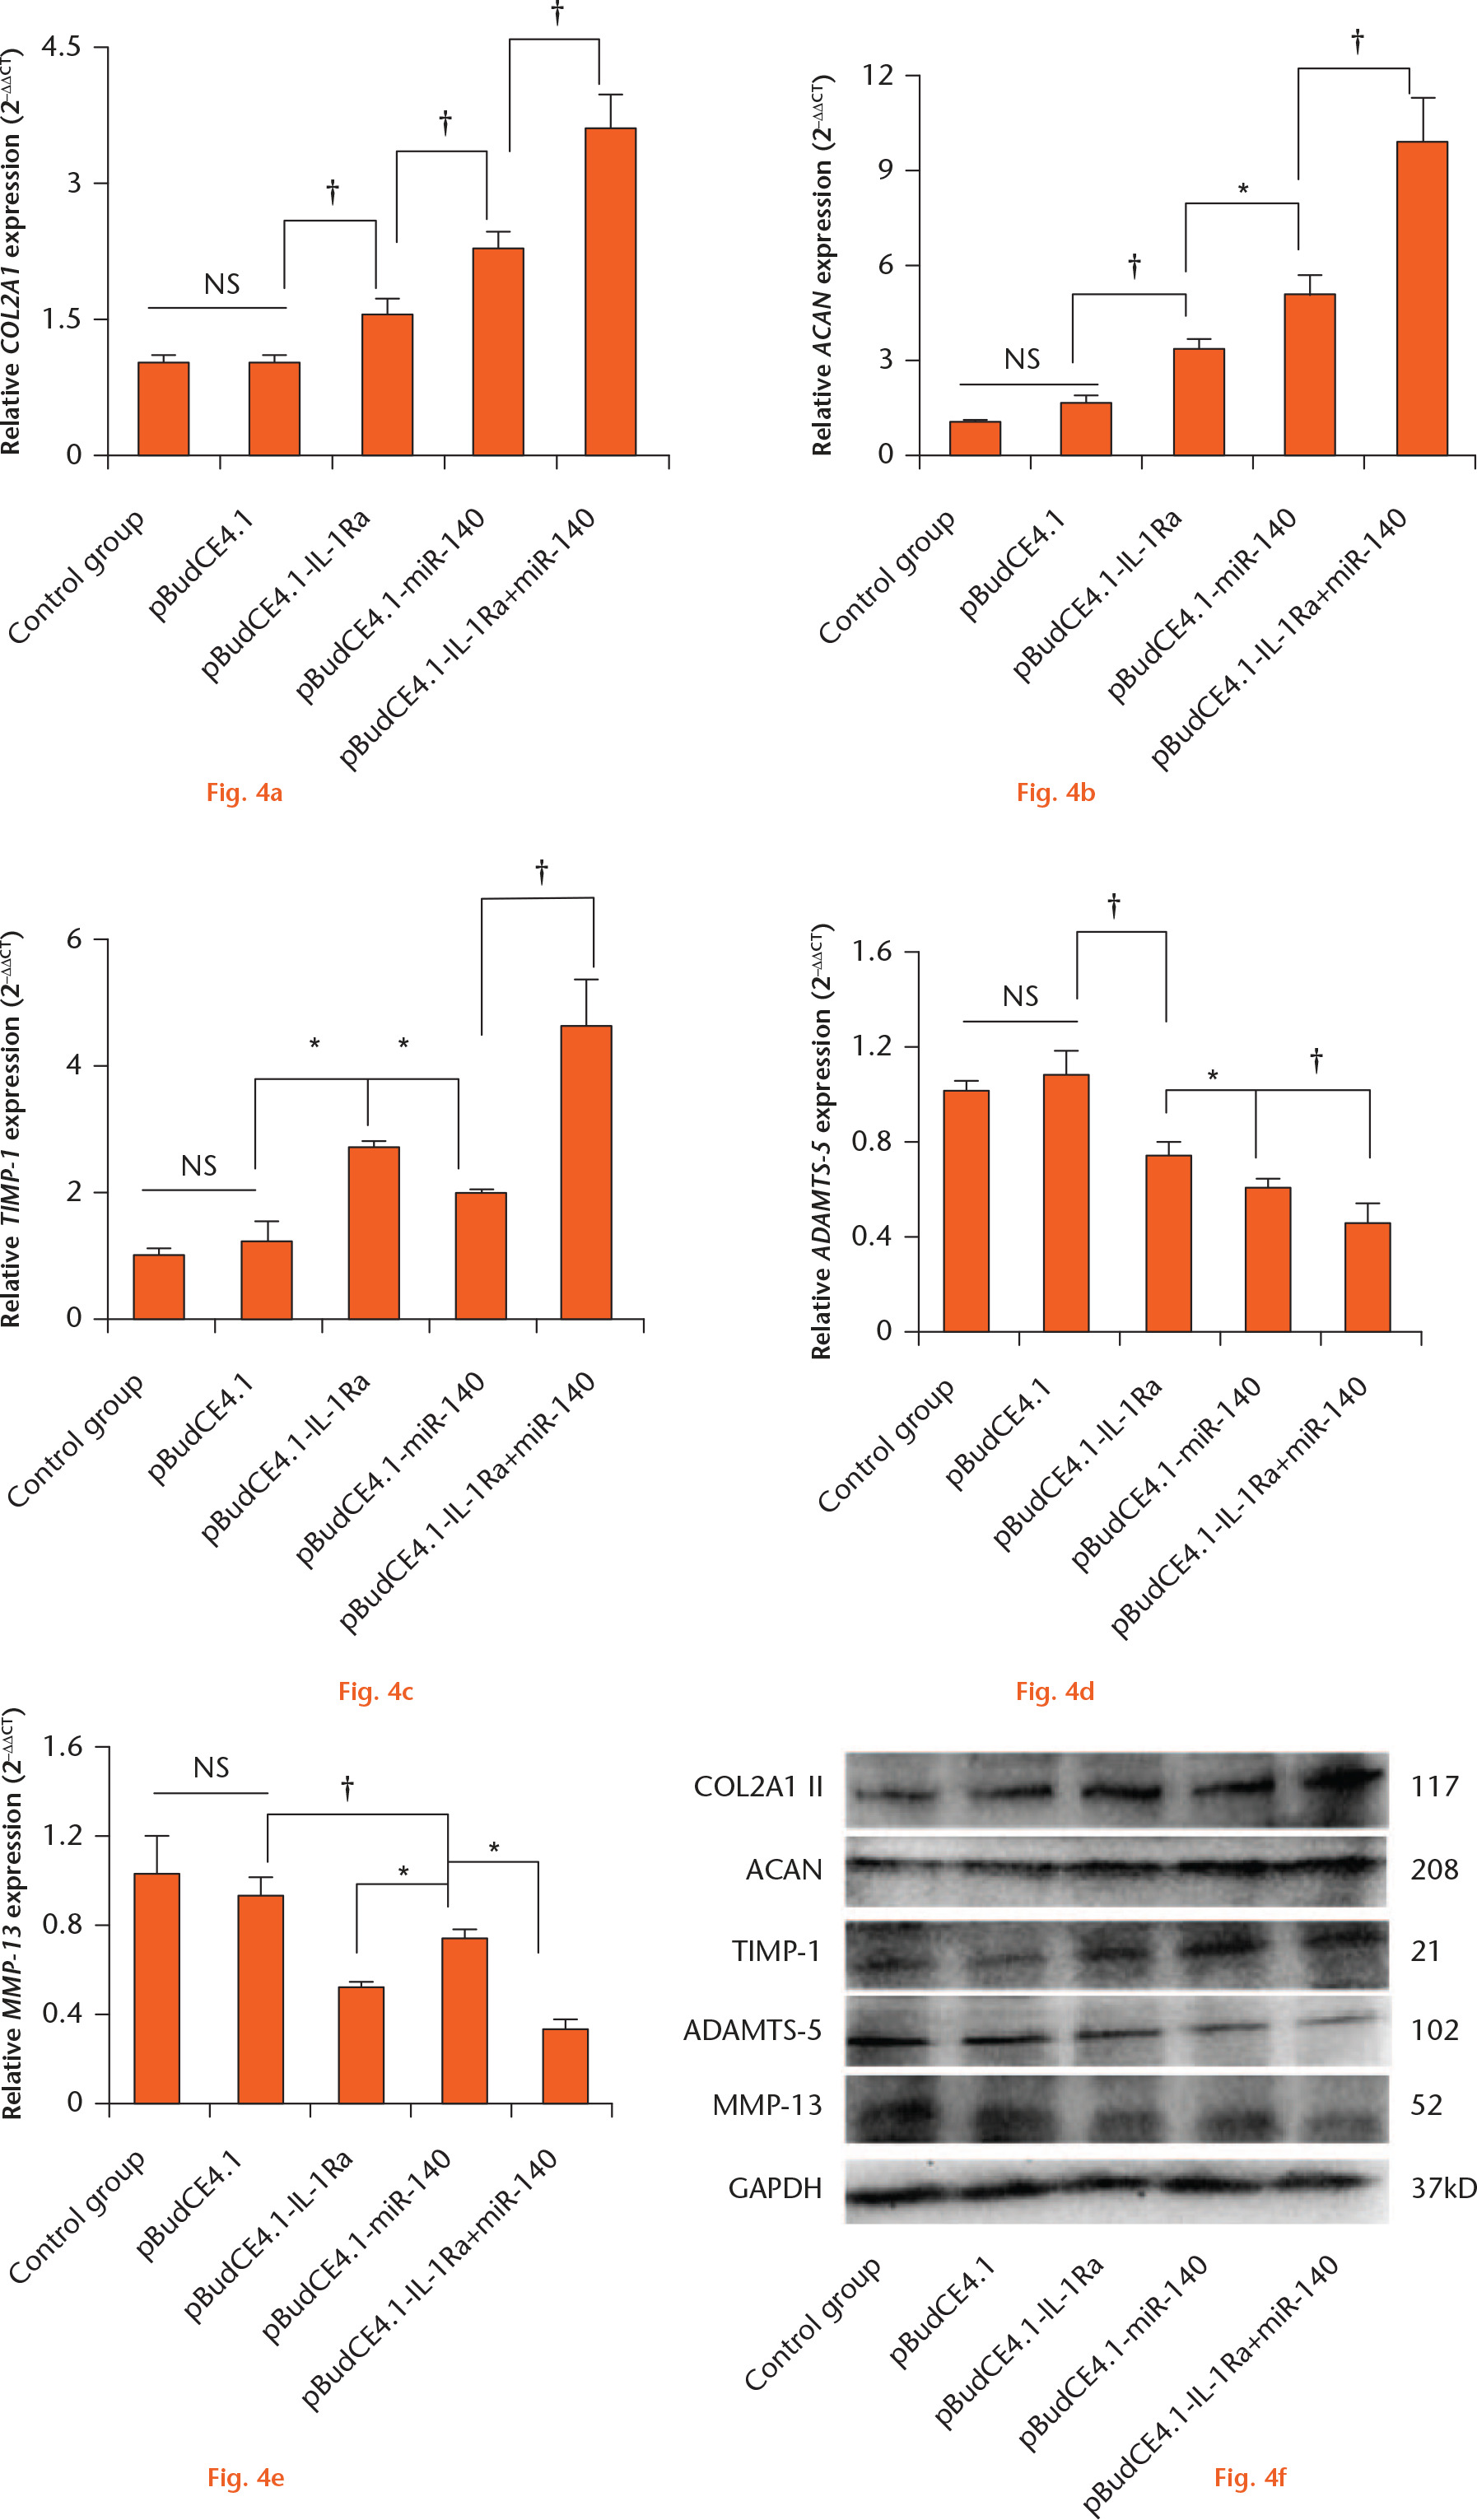 Fig. 4 
            The effect of gene delivery on collagen type II alpha 1 chain (COL2A1), aggrecan (ACAN), TIMP metallopeptidase inhibitor 1 (TIMP-1), a disintegrin and metalloproteinase with thrombospondin motifs 5 (ADAMTS-5), and metalloproteinase (MMP)-13 expression in chondrocytes. Graphs showing real-time fluorescent quantitative polymerase chain reaction (RT-qPCR) assays for the mRNA expression of: a) COL2A1; b) ACAN; c) TIMP-1; d) ADAMTS-5; and e) MMP-13. The data are shown as mean values and standard deviations. The raw mRNA gene expression data for each group were calibrated to the reference gene β-2-microglobulin (B2M), and the relative expression level of each gene is represented as 2-∆∆CT. *p < 0.05; †p < 0.01; NS, not significant. f) Western blot assays for the protein expression of collagen II, aggrecan, TIMP-1, ADAMTS-5, and MMP-13. Glyceraldehyde 3-phosphate dehydrogenase (GAPDH) was used as the internal control.
          